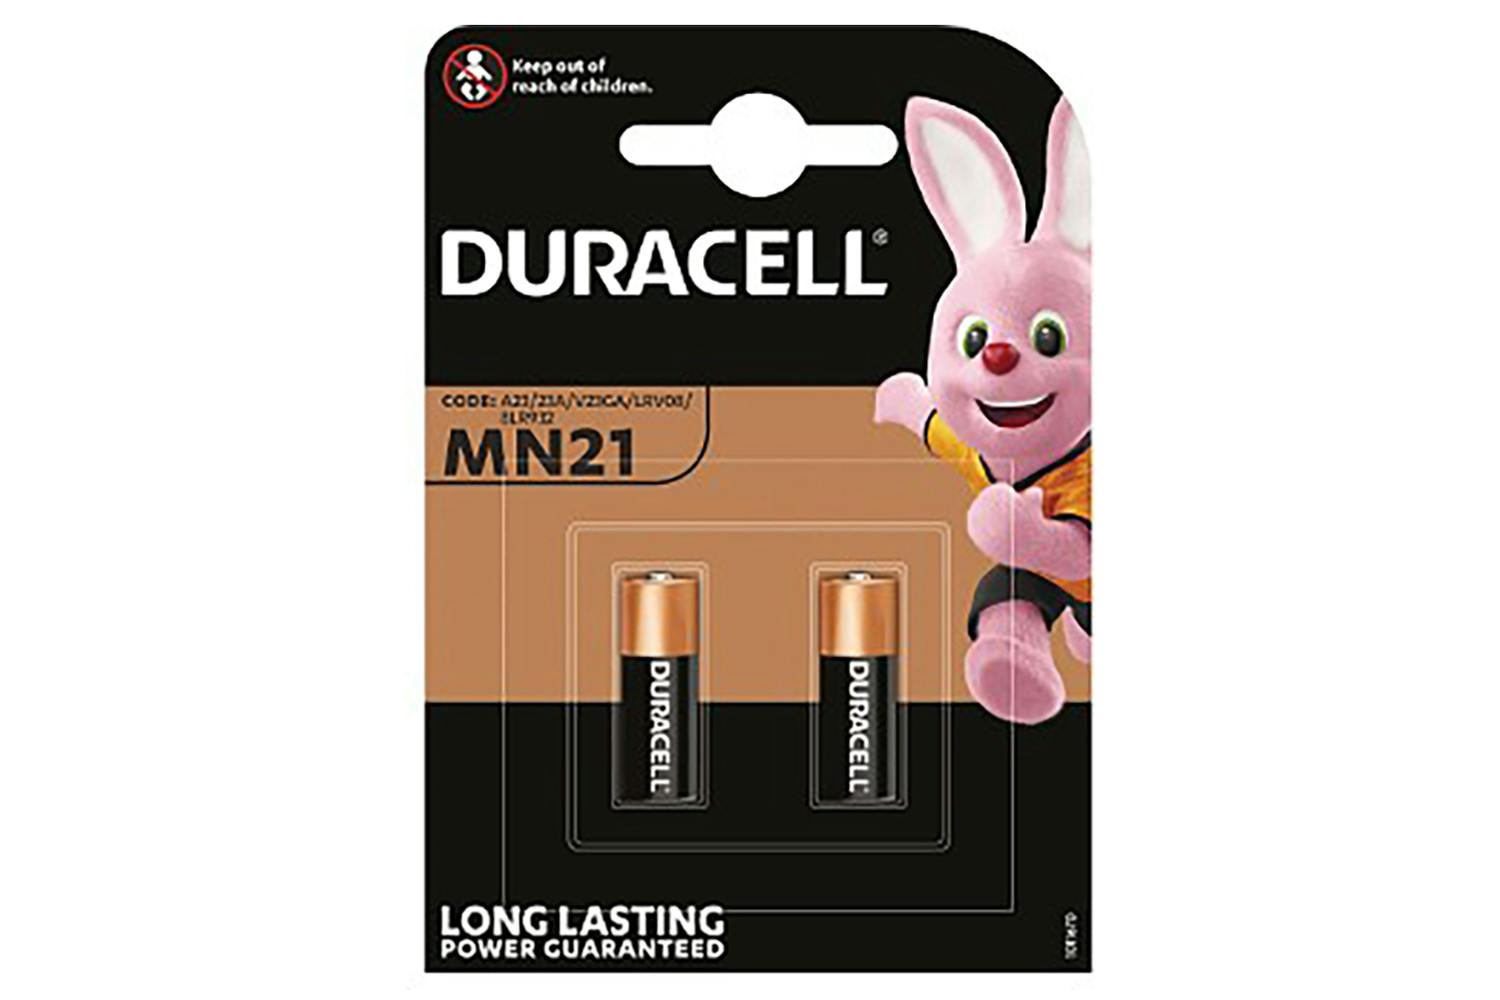 Duracell 12V Alkaline Security Battery | Pack of 2